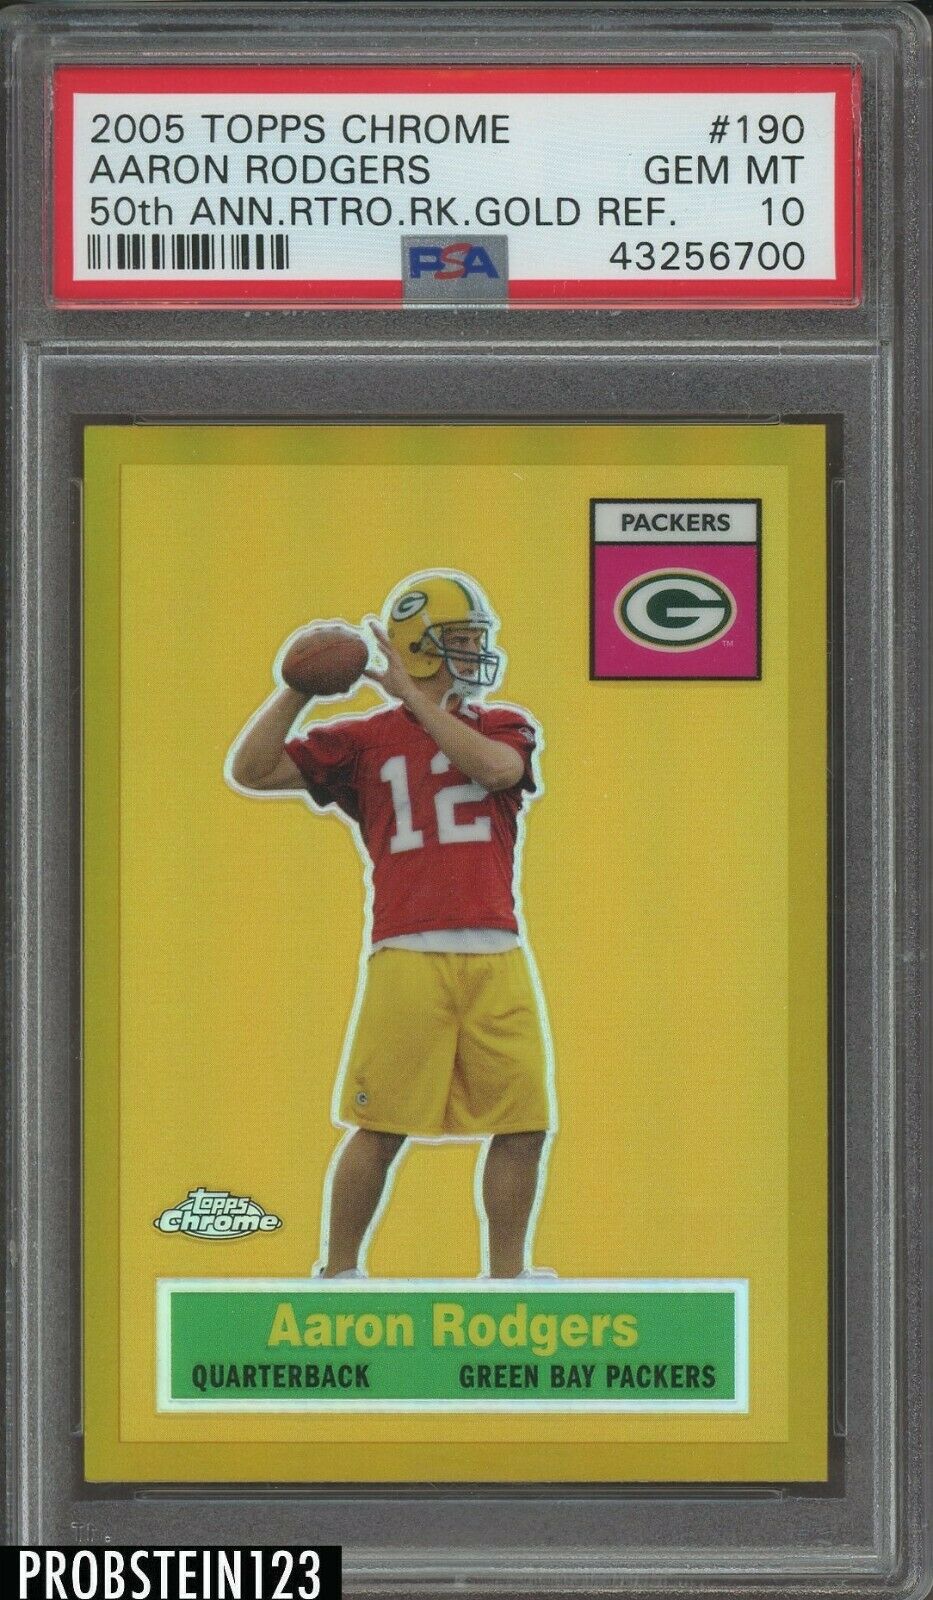 2005 Topps Chrome 50th Anniversary Gold Refractor Aaron Rodgers RC 50 PSA 10